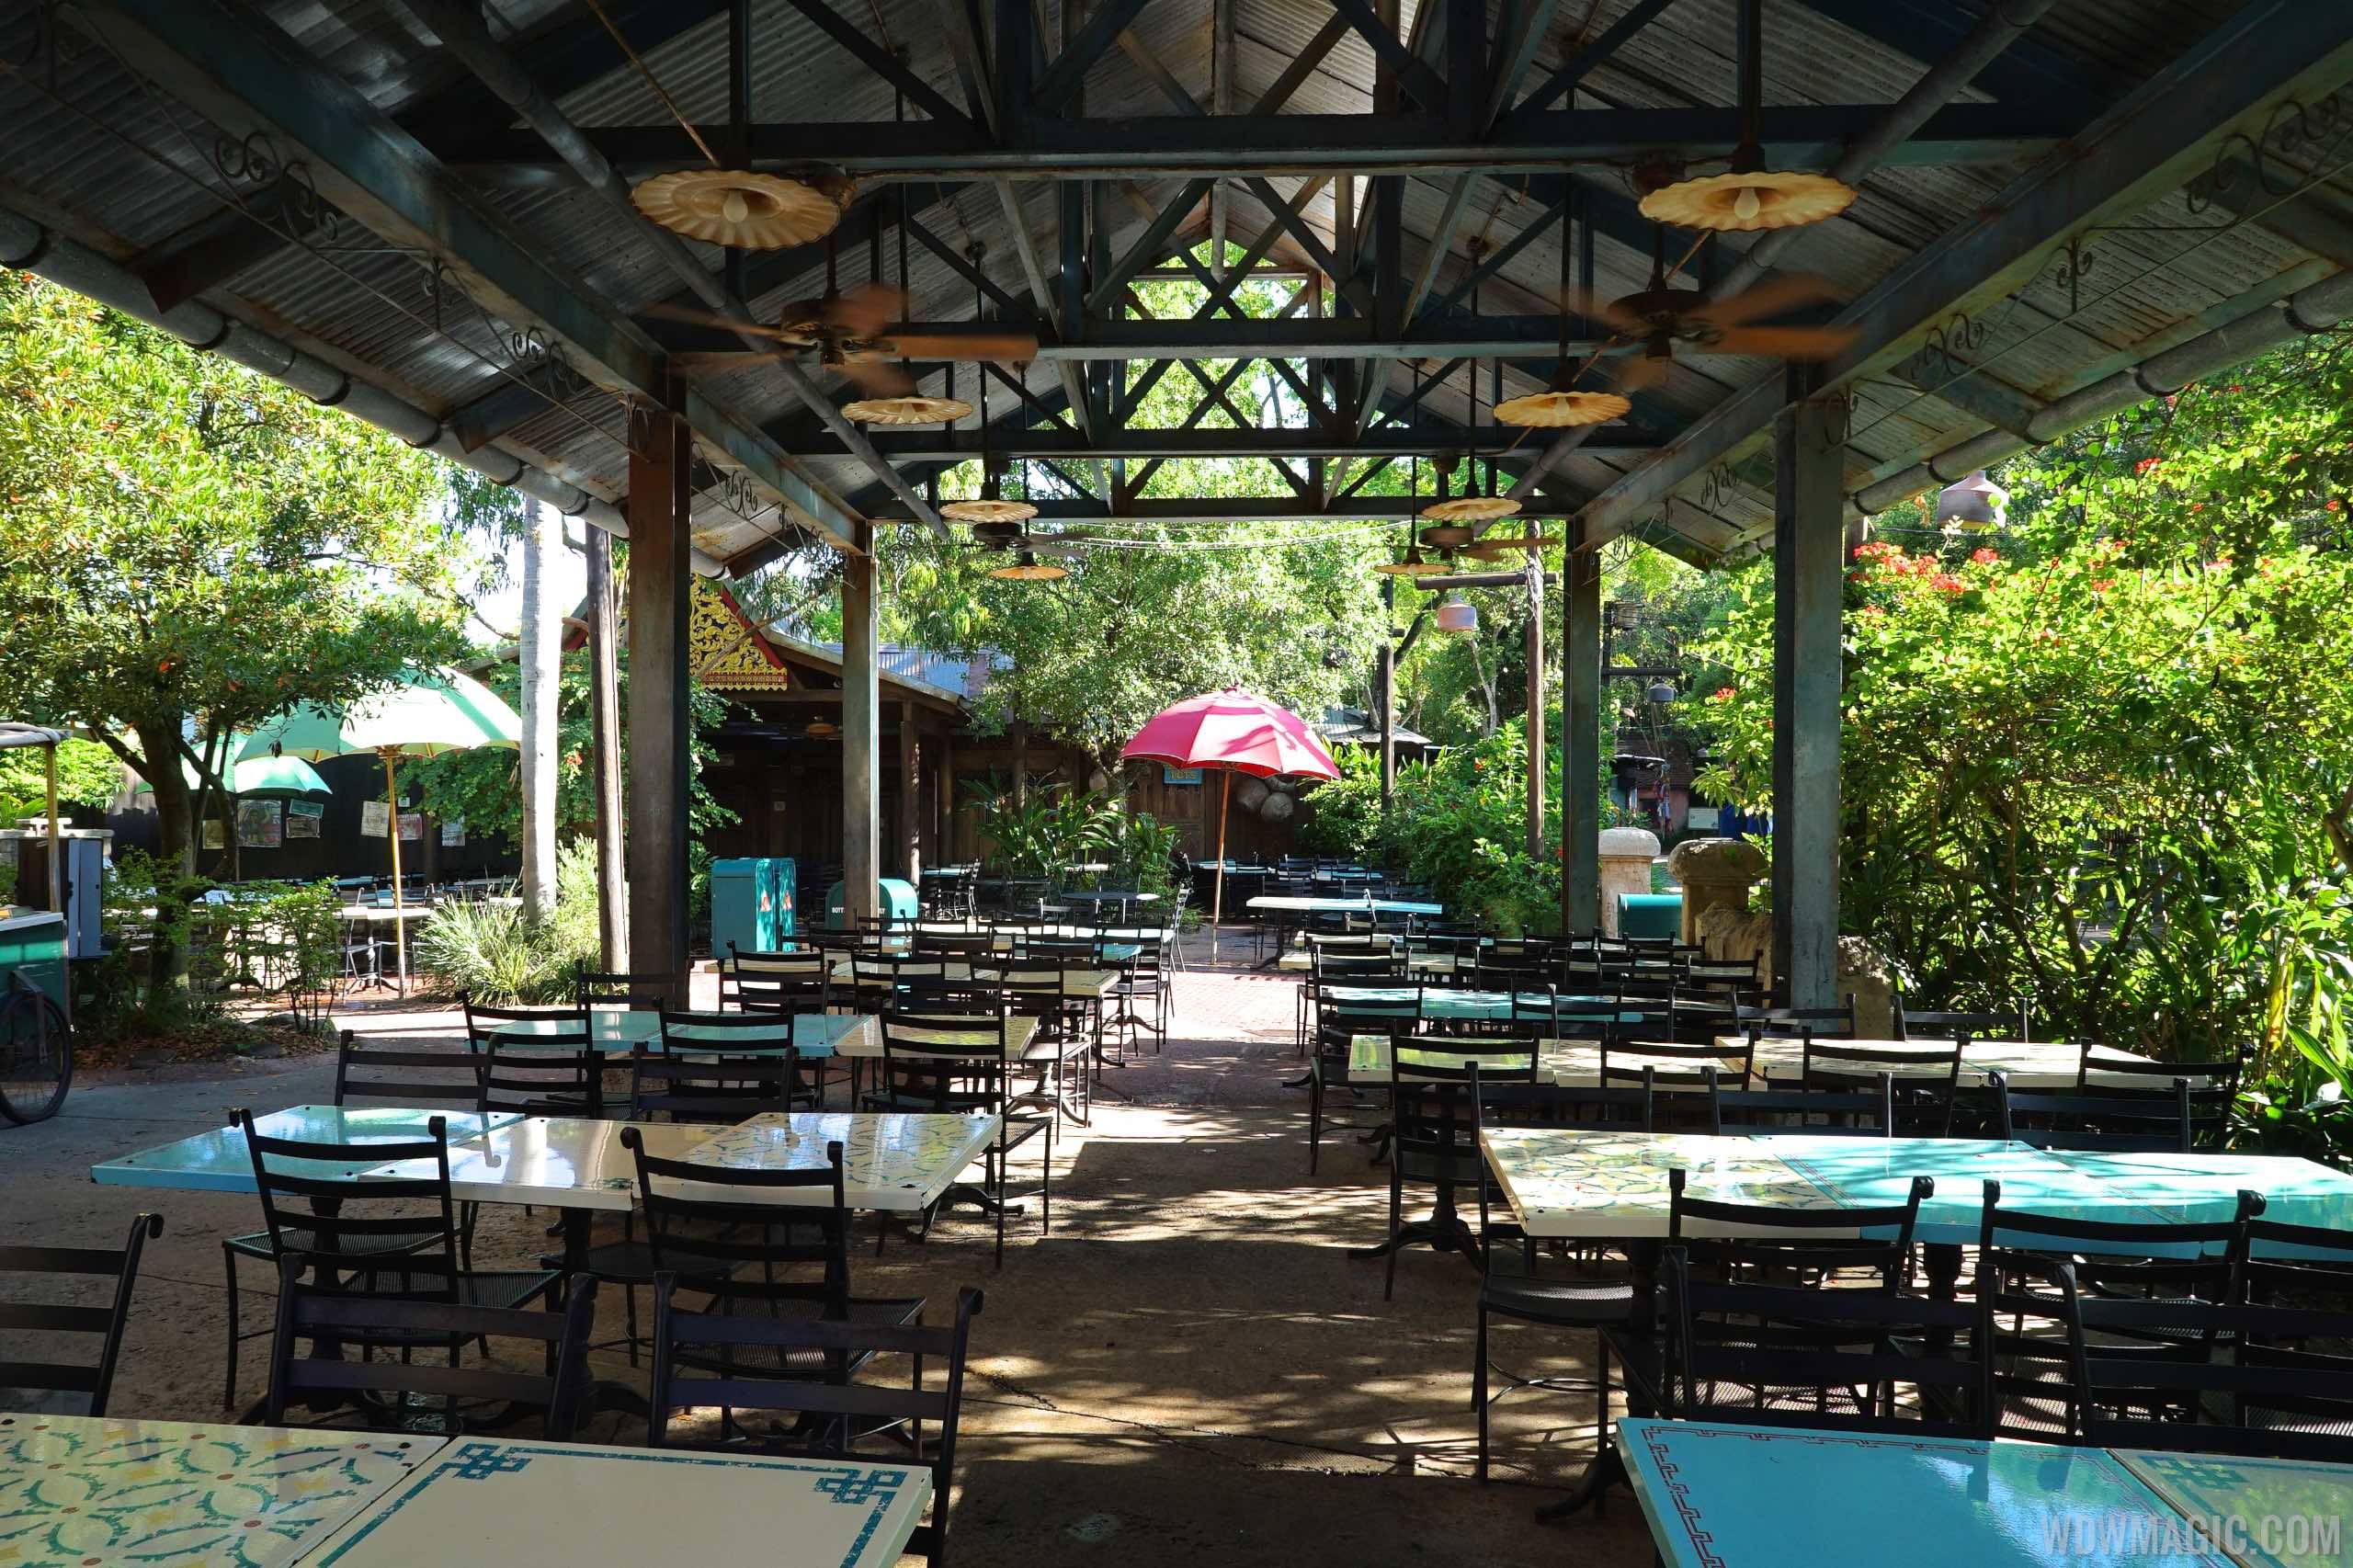 Yak and Yeti Local Foods now offers breakfast at Disney's Animal Kingdom